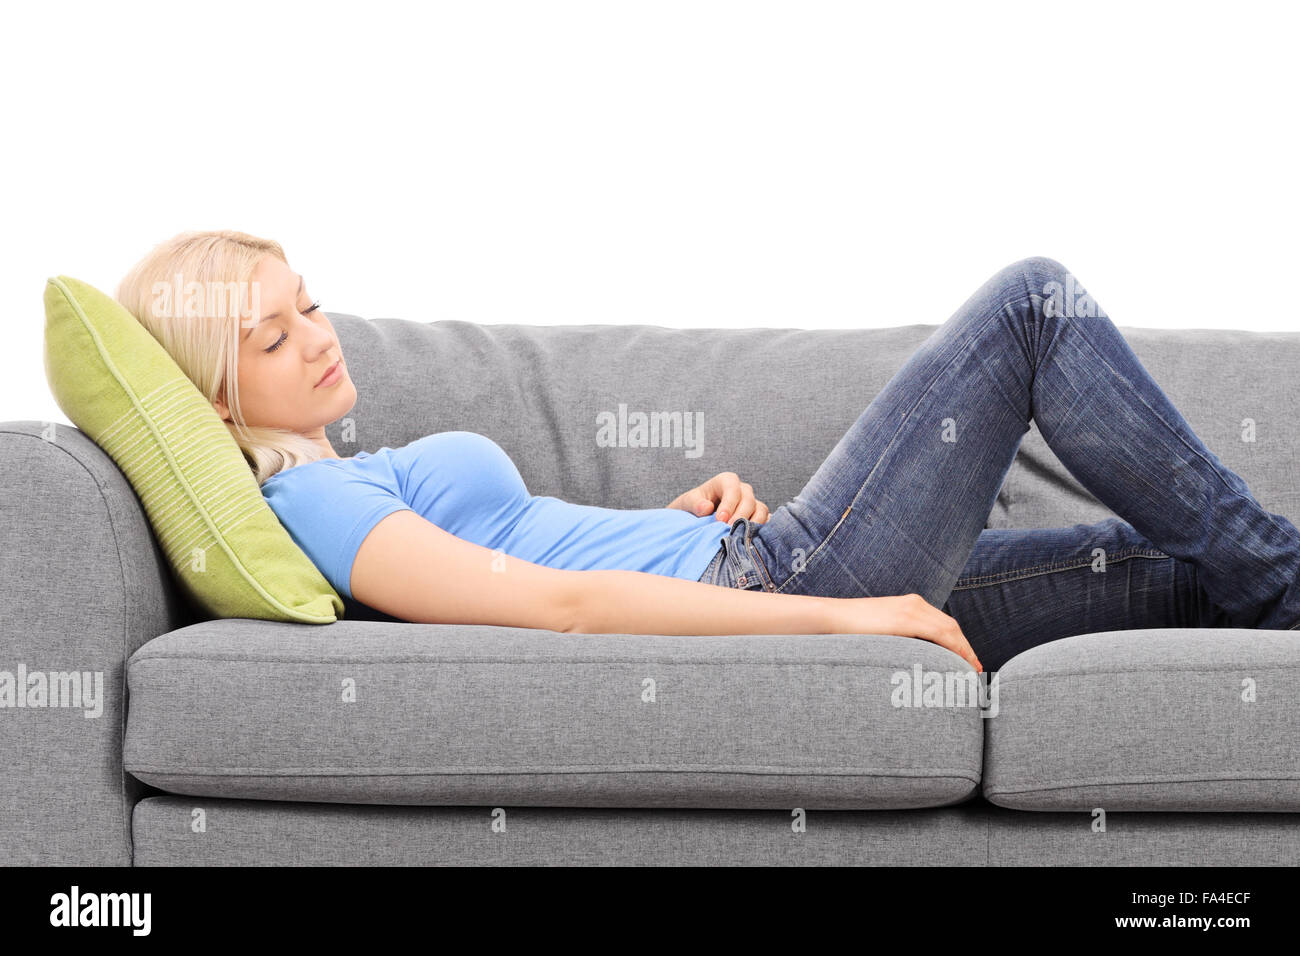 Young blond woman sleeping on a gray couch isolated on white background Stock Photo